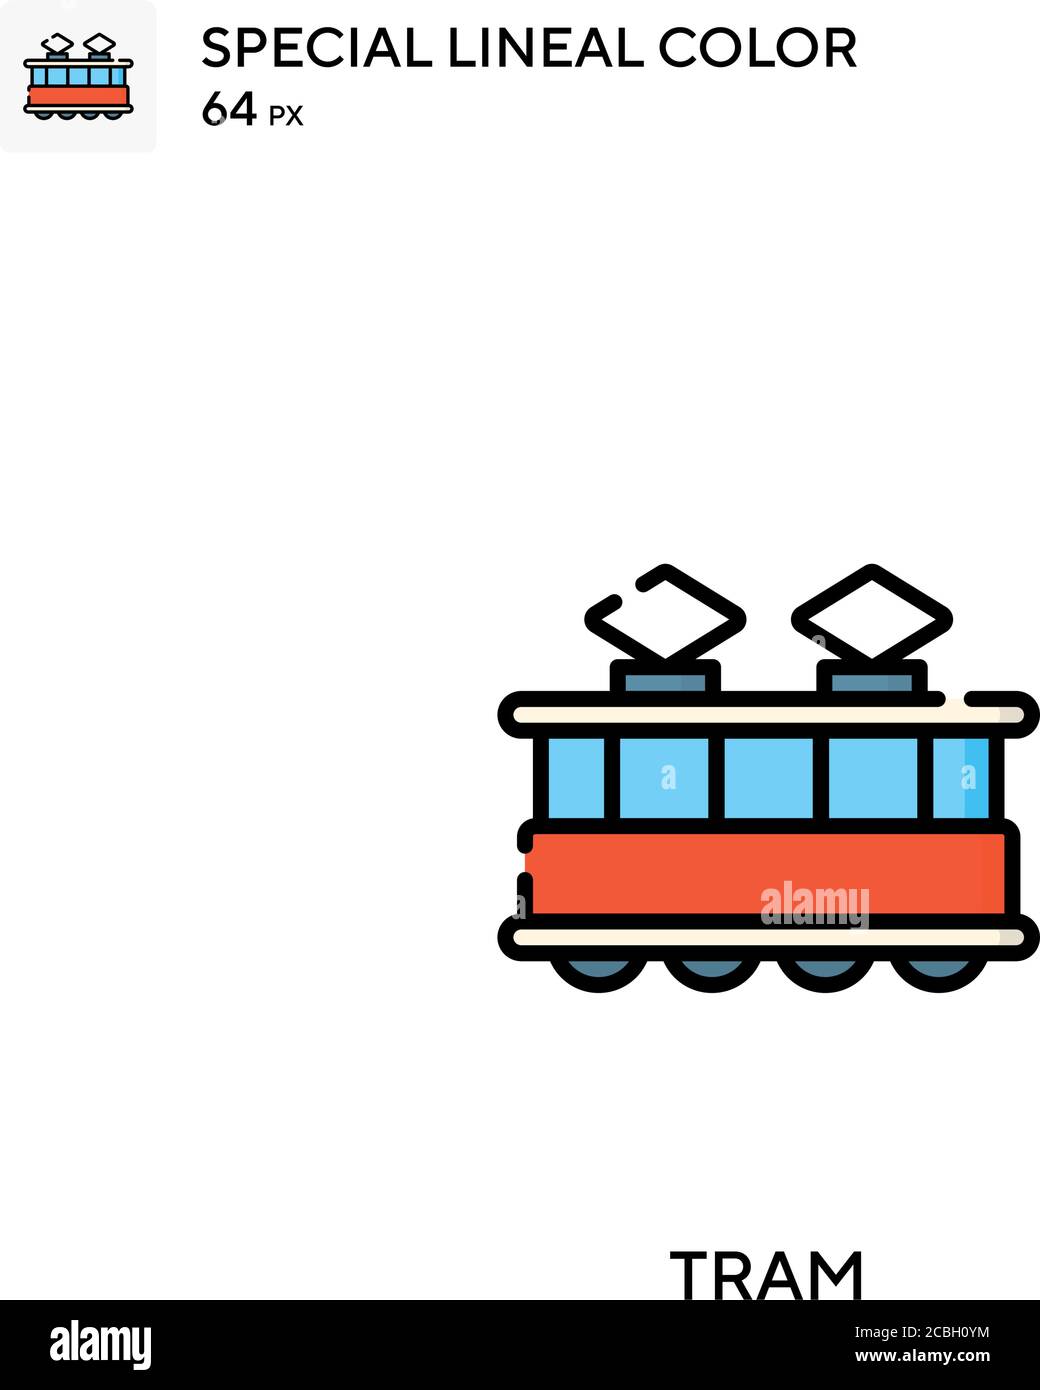 Tram special lineal color vector icon. Tram icons for your business project Stock Vector